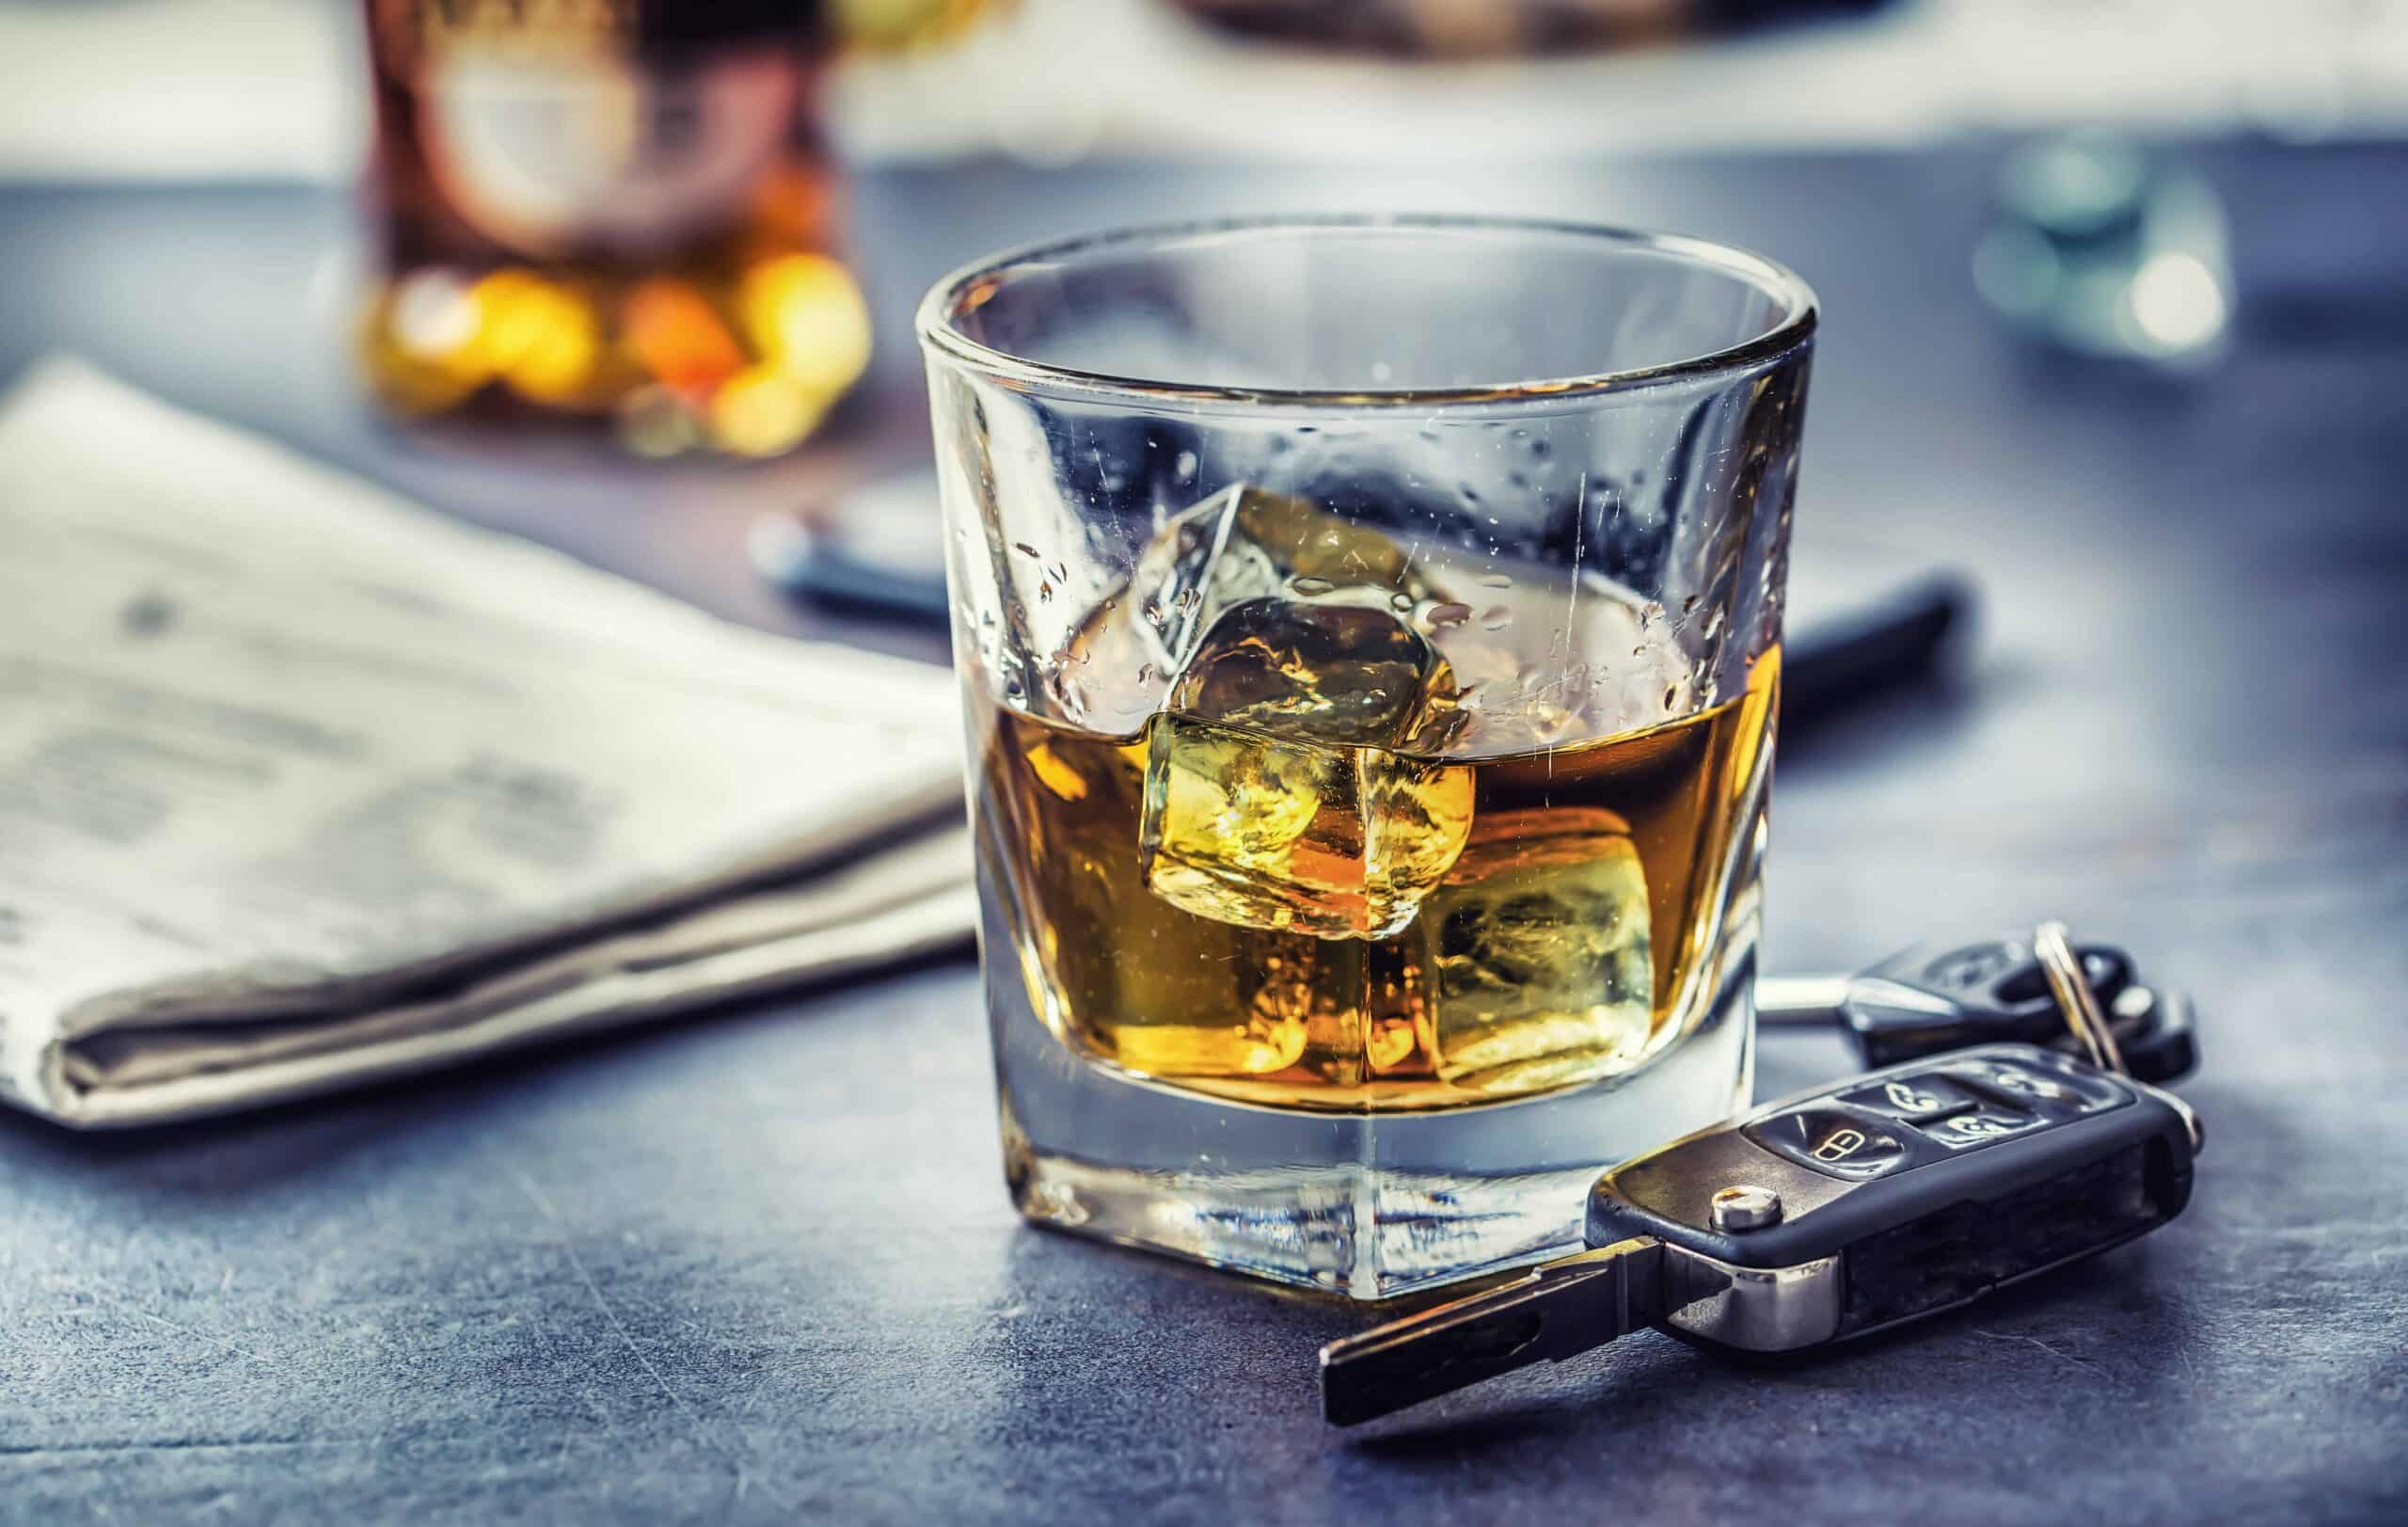 How Long Does a DUI Stay on Your Record in Florida?